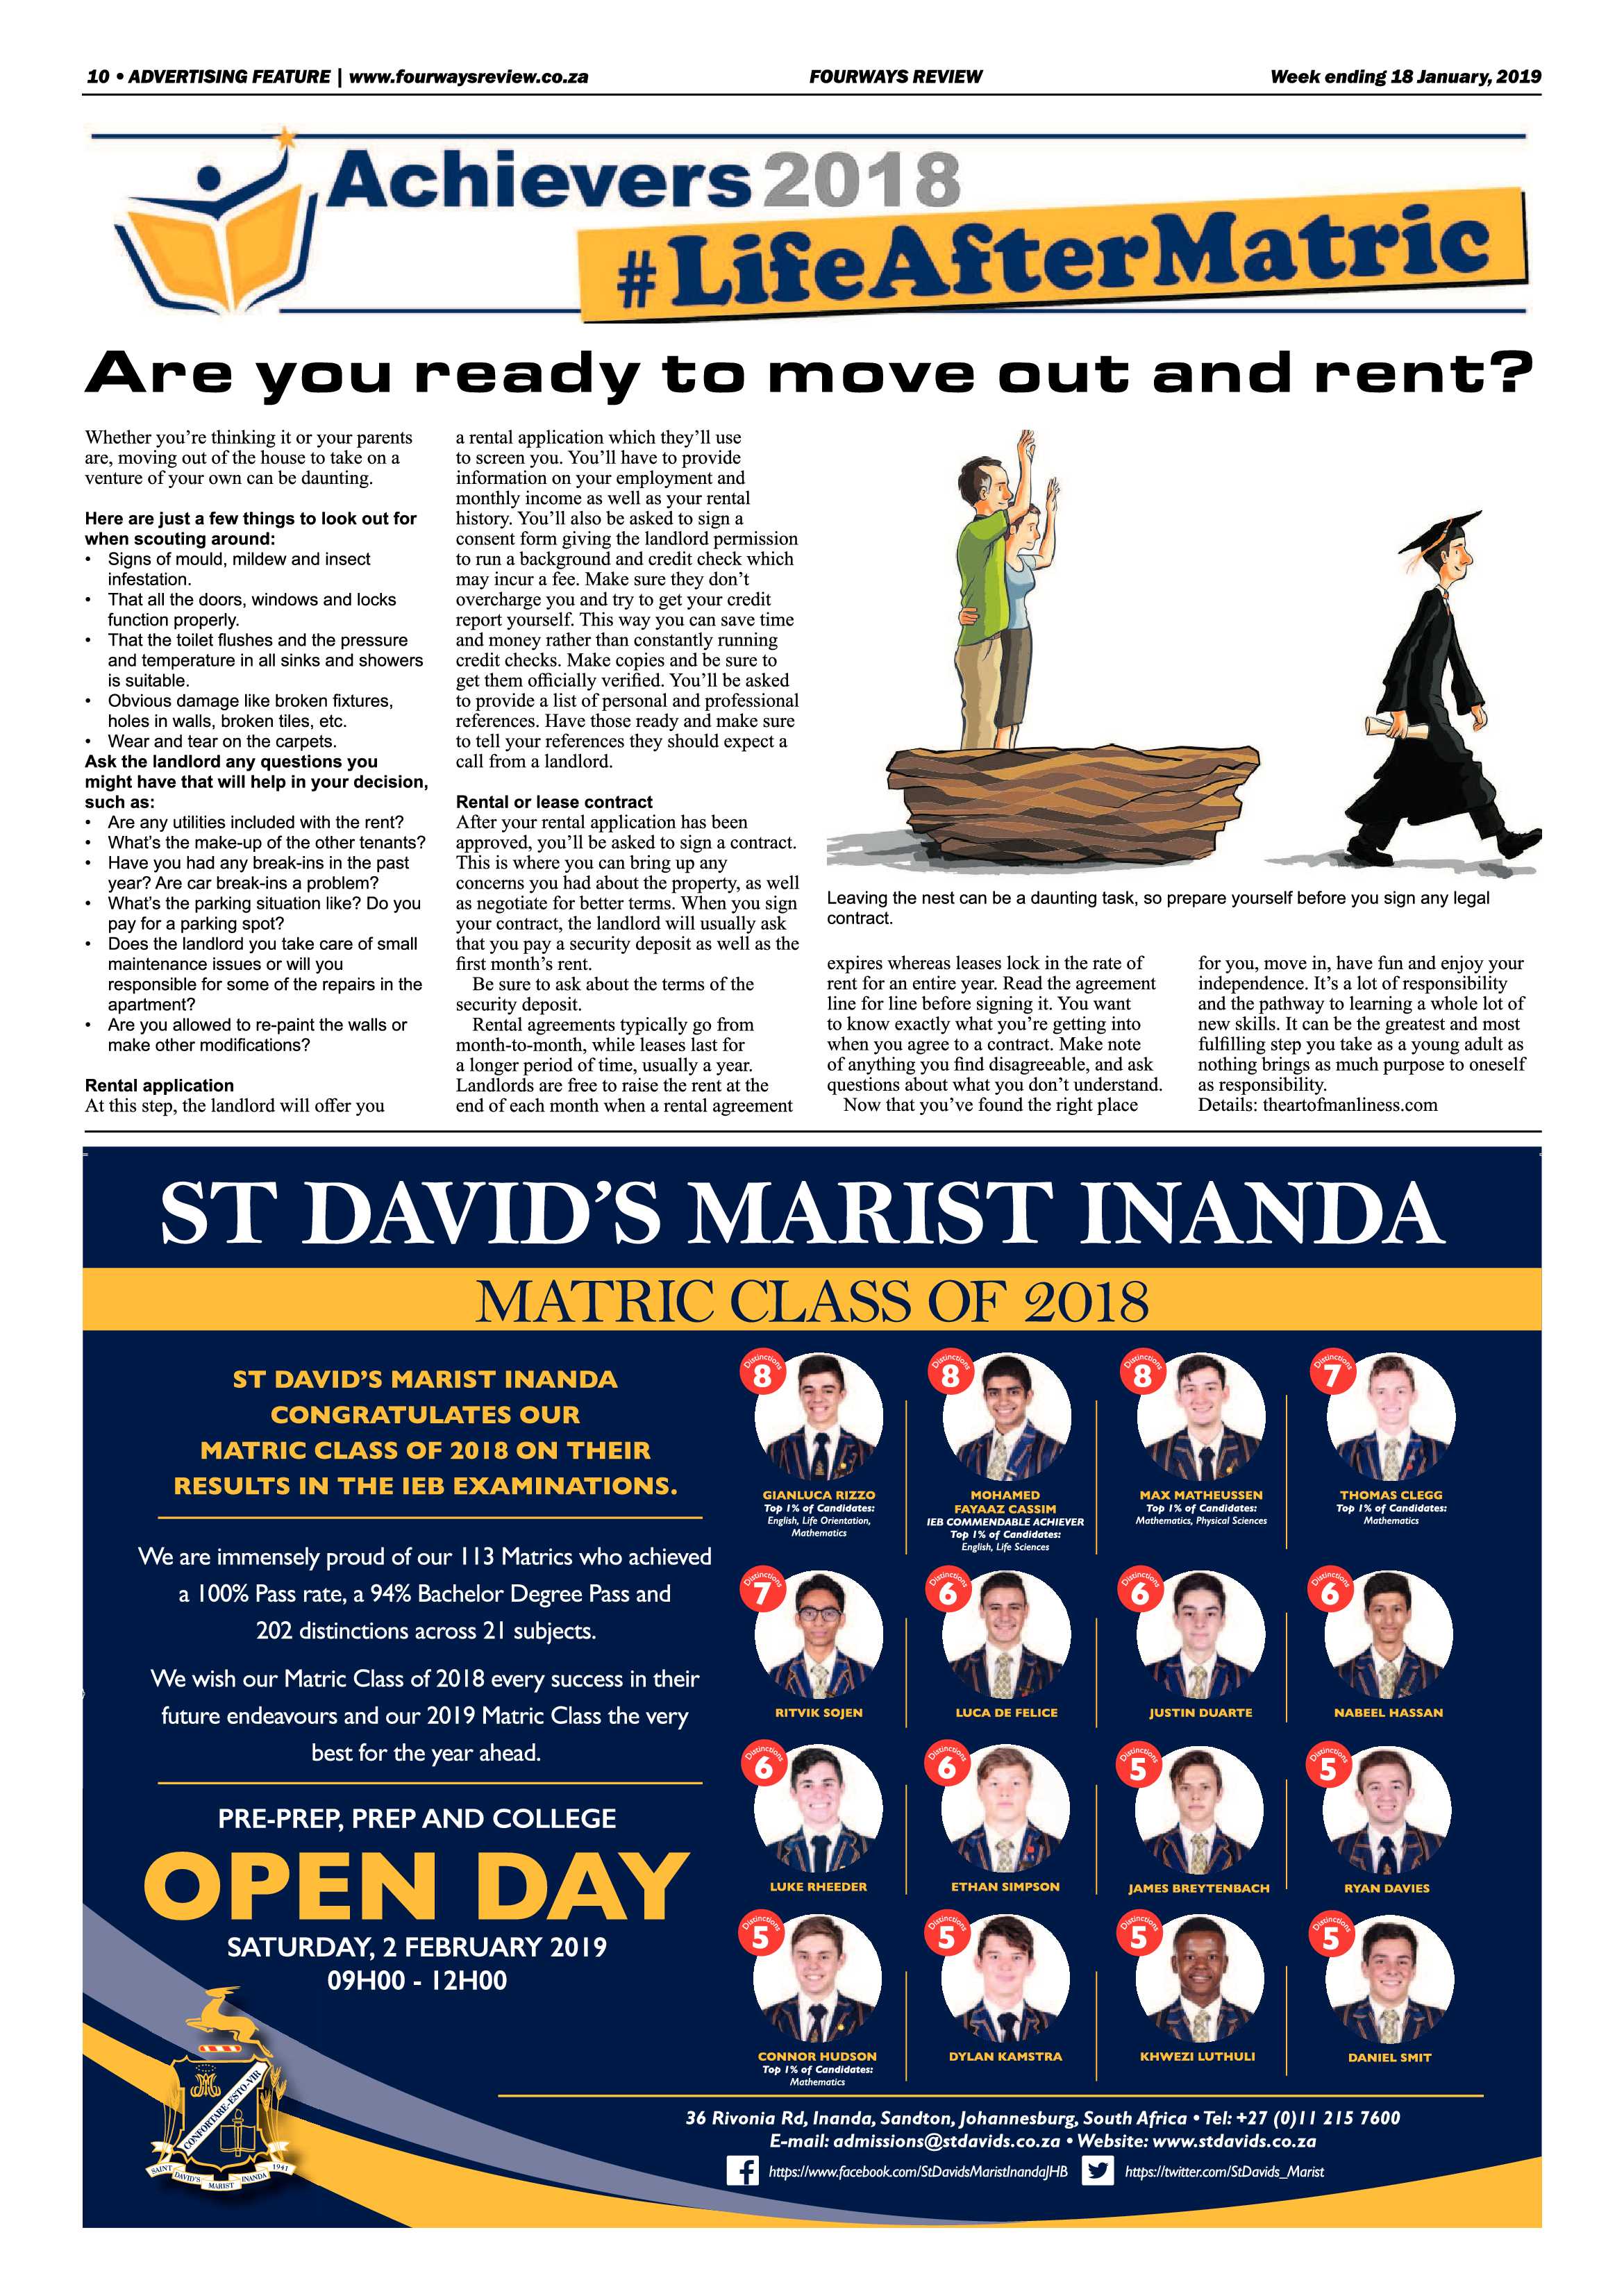 Fourways Review 18 January, 2019 page 10